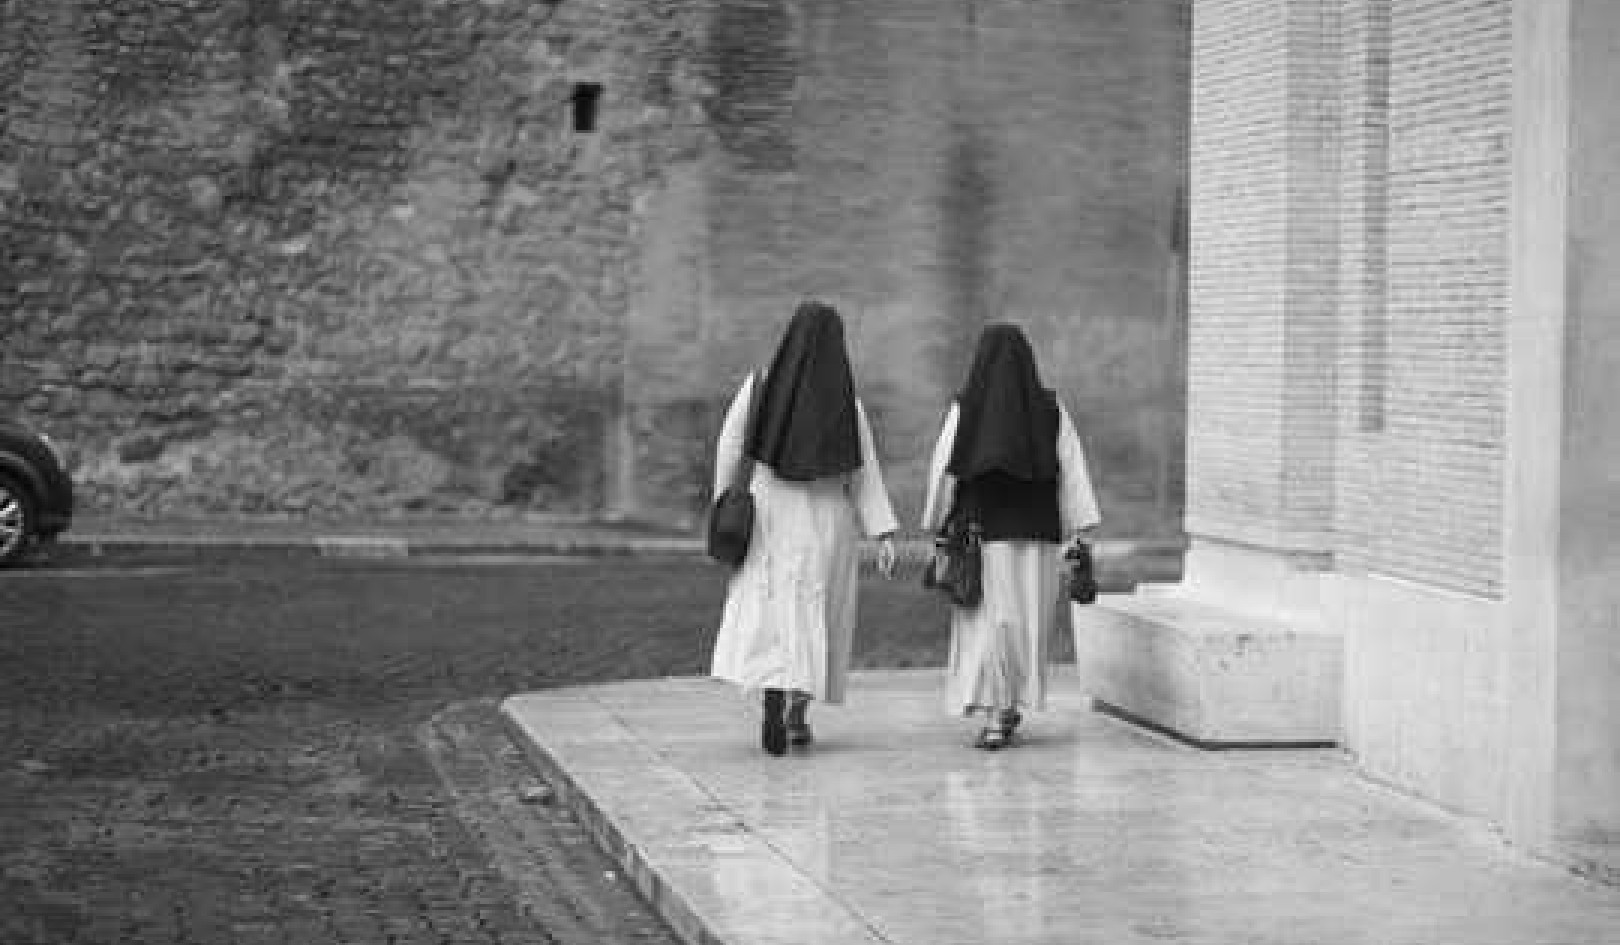 How The Role Of Nuns Highlights A Low View Of Women's Work